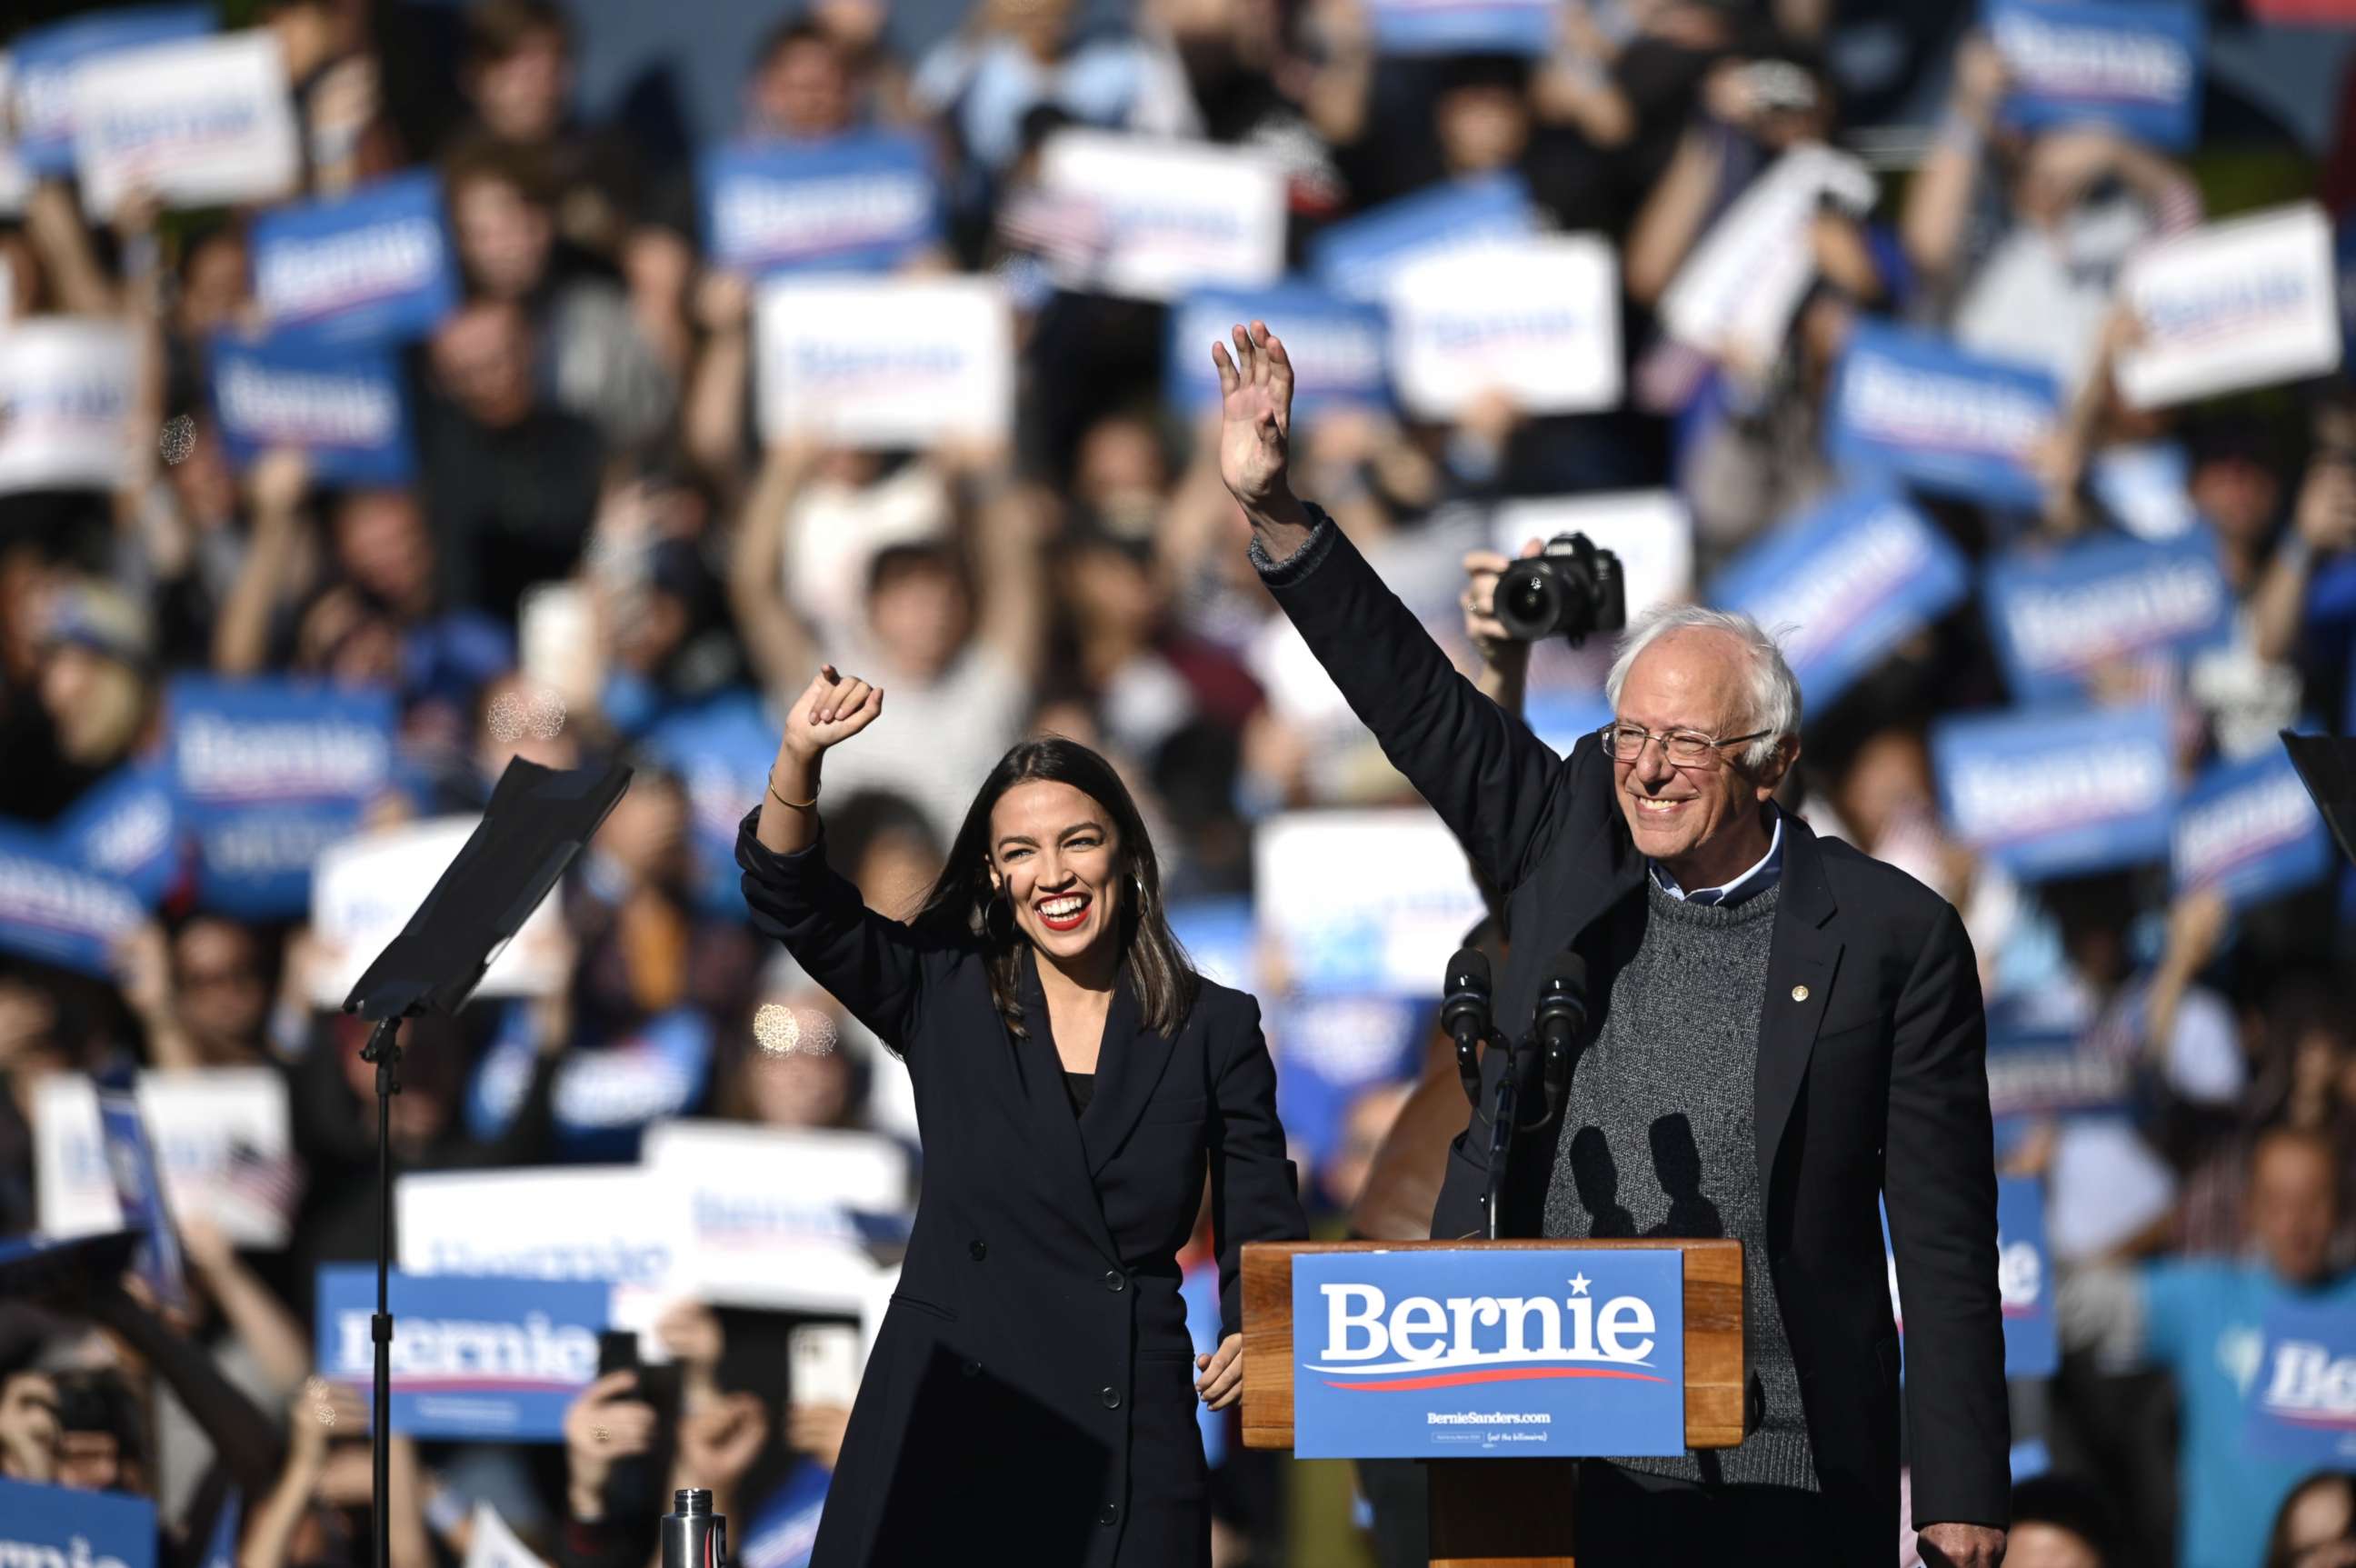 PHOTO: 2020 Democratic presidential hopeful US Senator Bernie Sanders (D-VT) and representative Alexandria Ocasio-Cortez (D-NY) wave to a crowd of supporters during a campaign rally on October 19, 2019  in New York City.